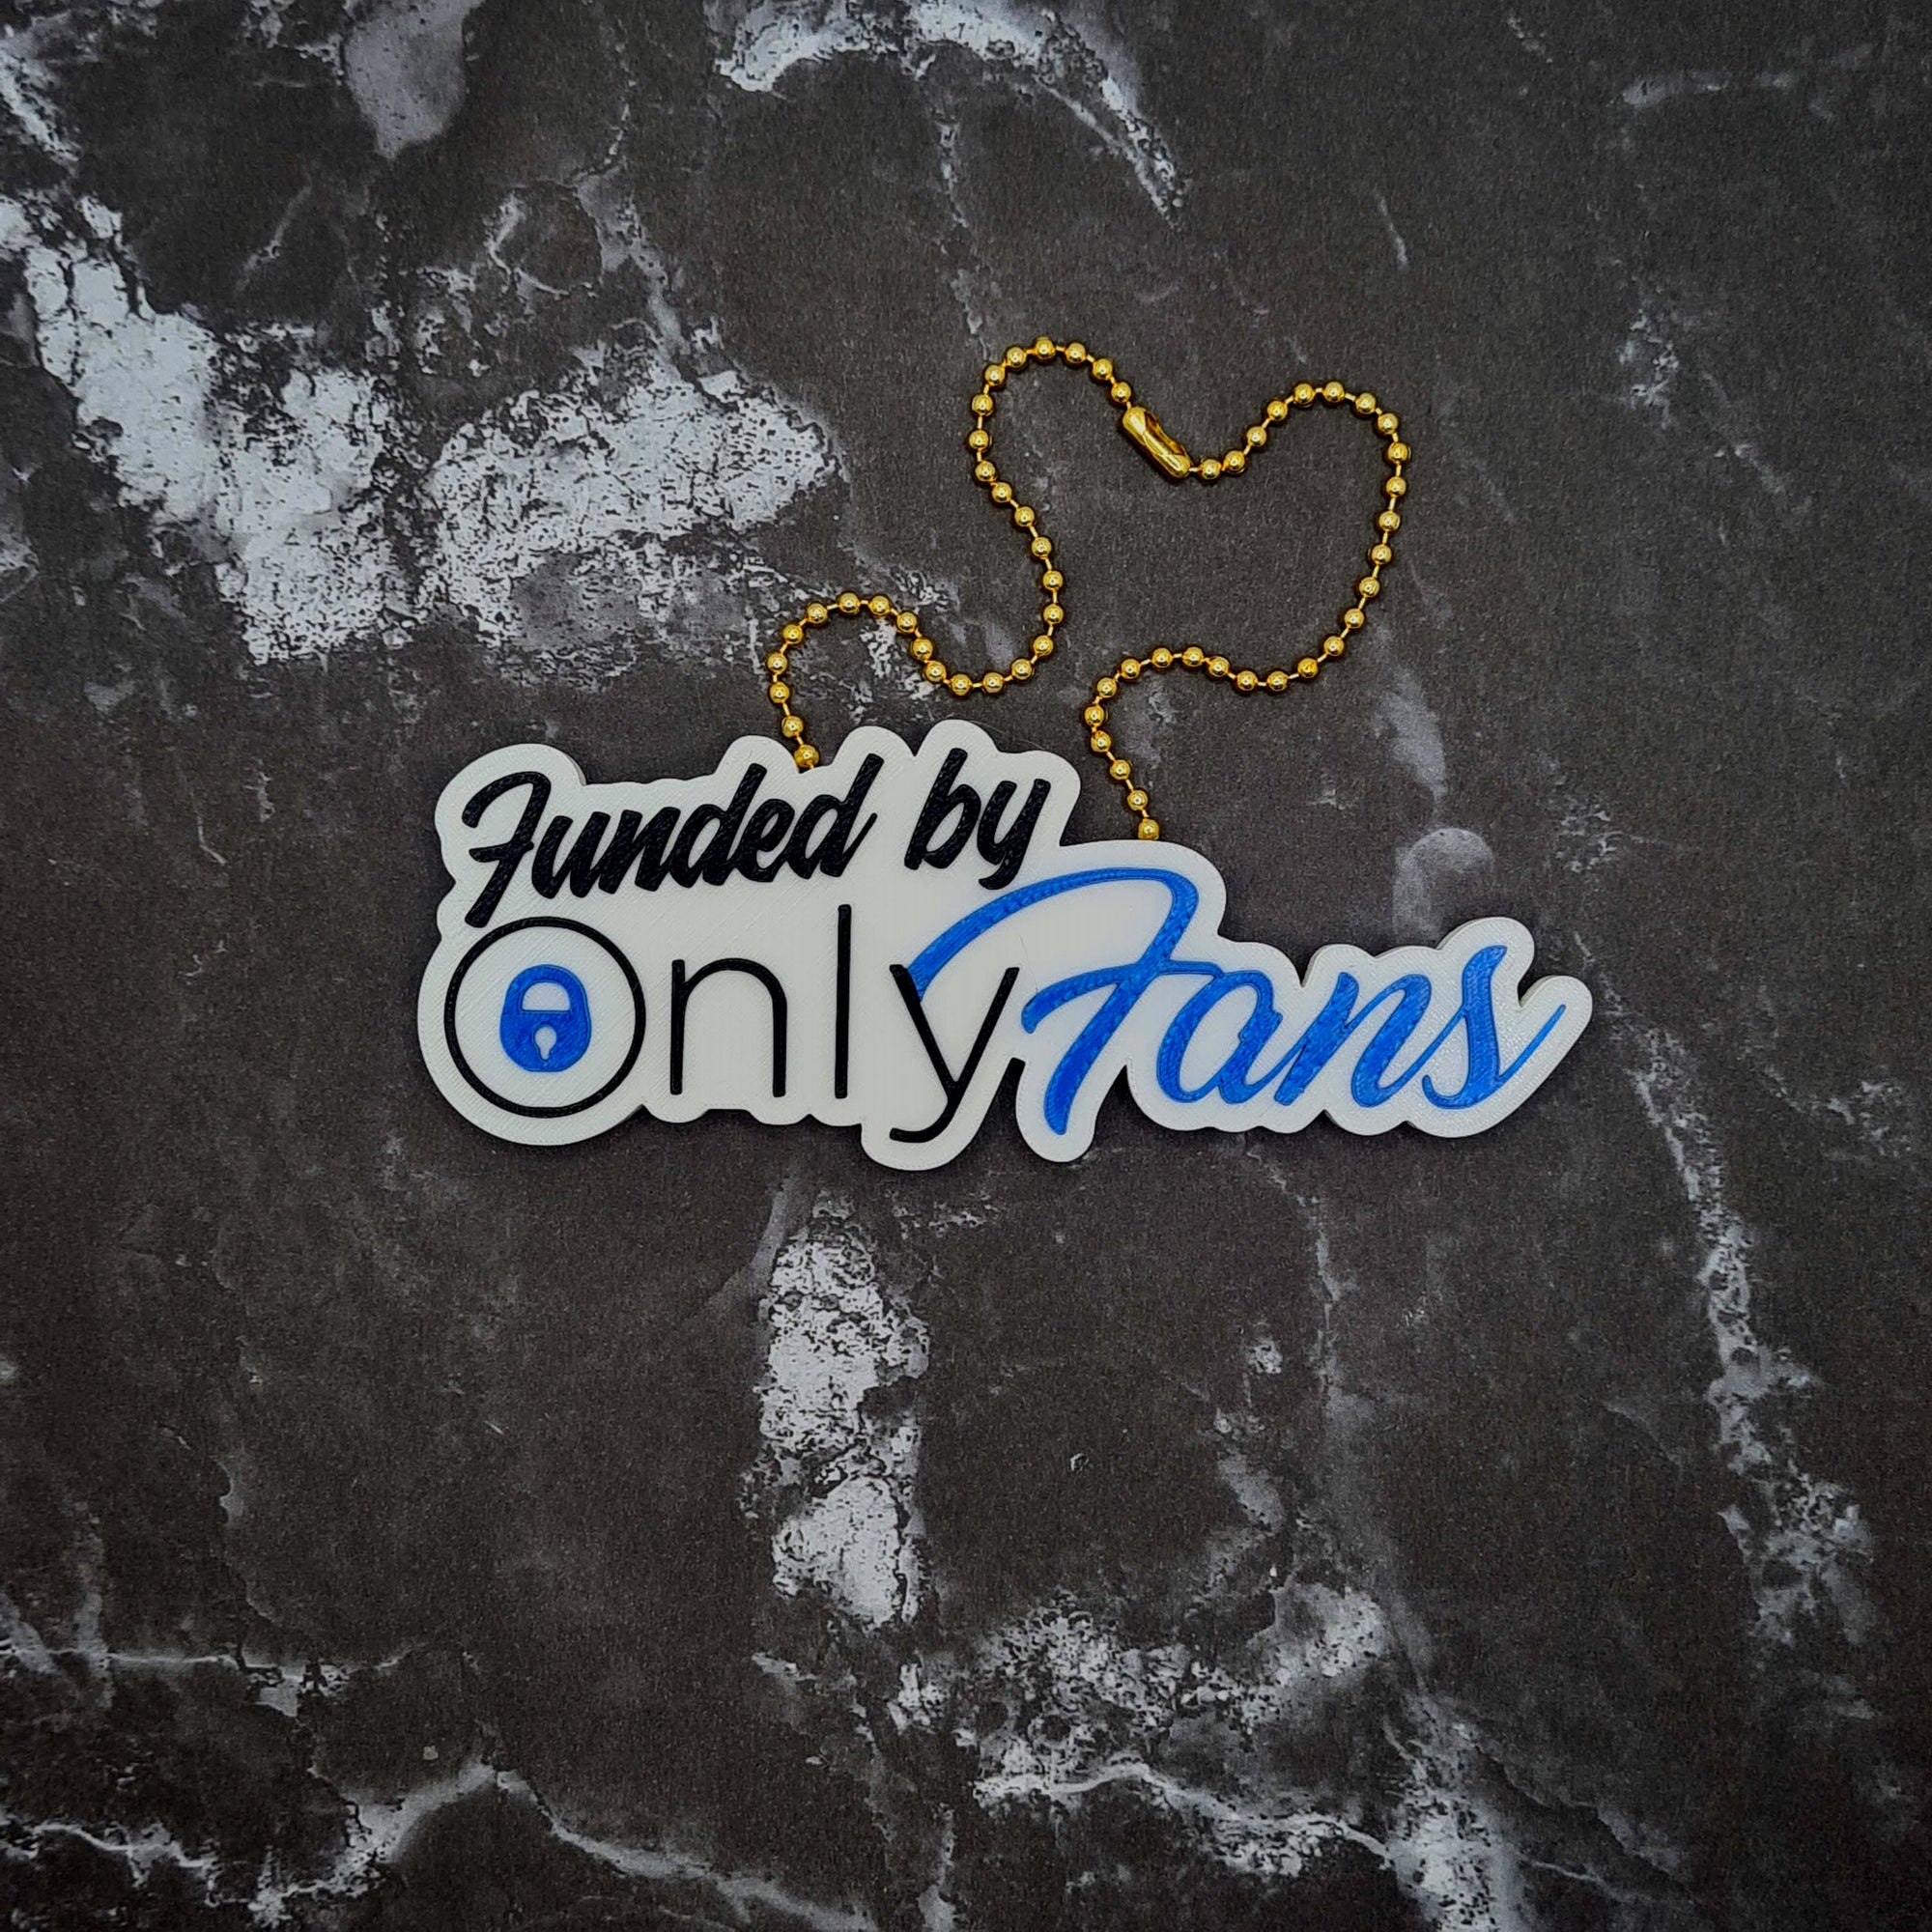 Funded by OnlyFans Charm!